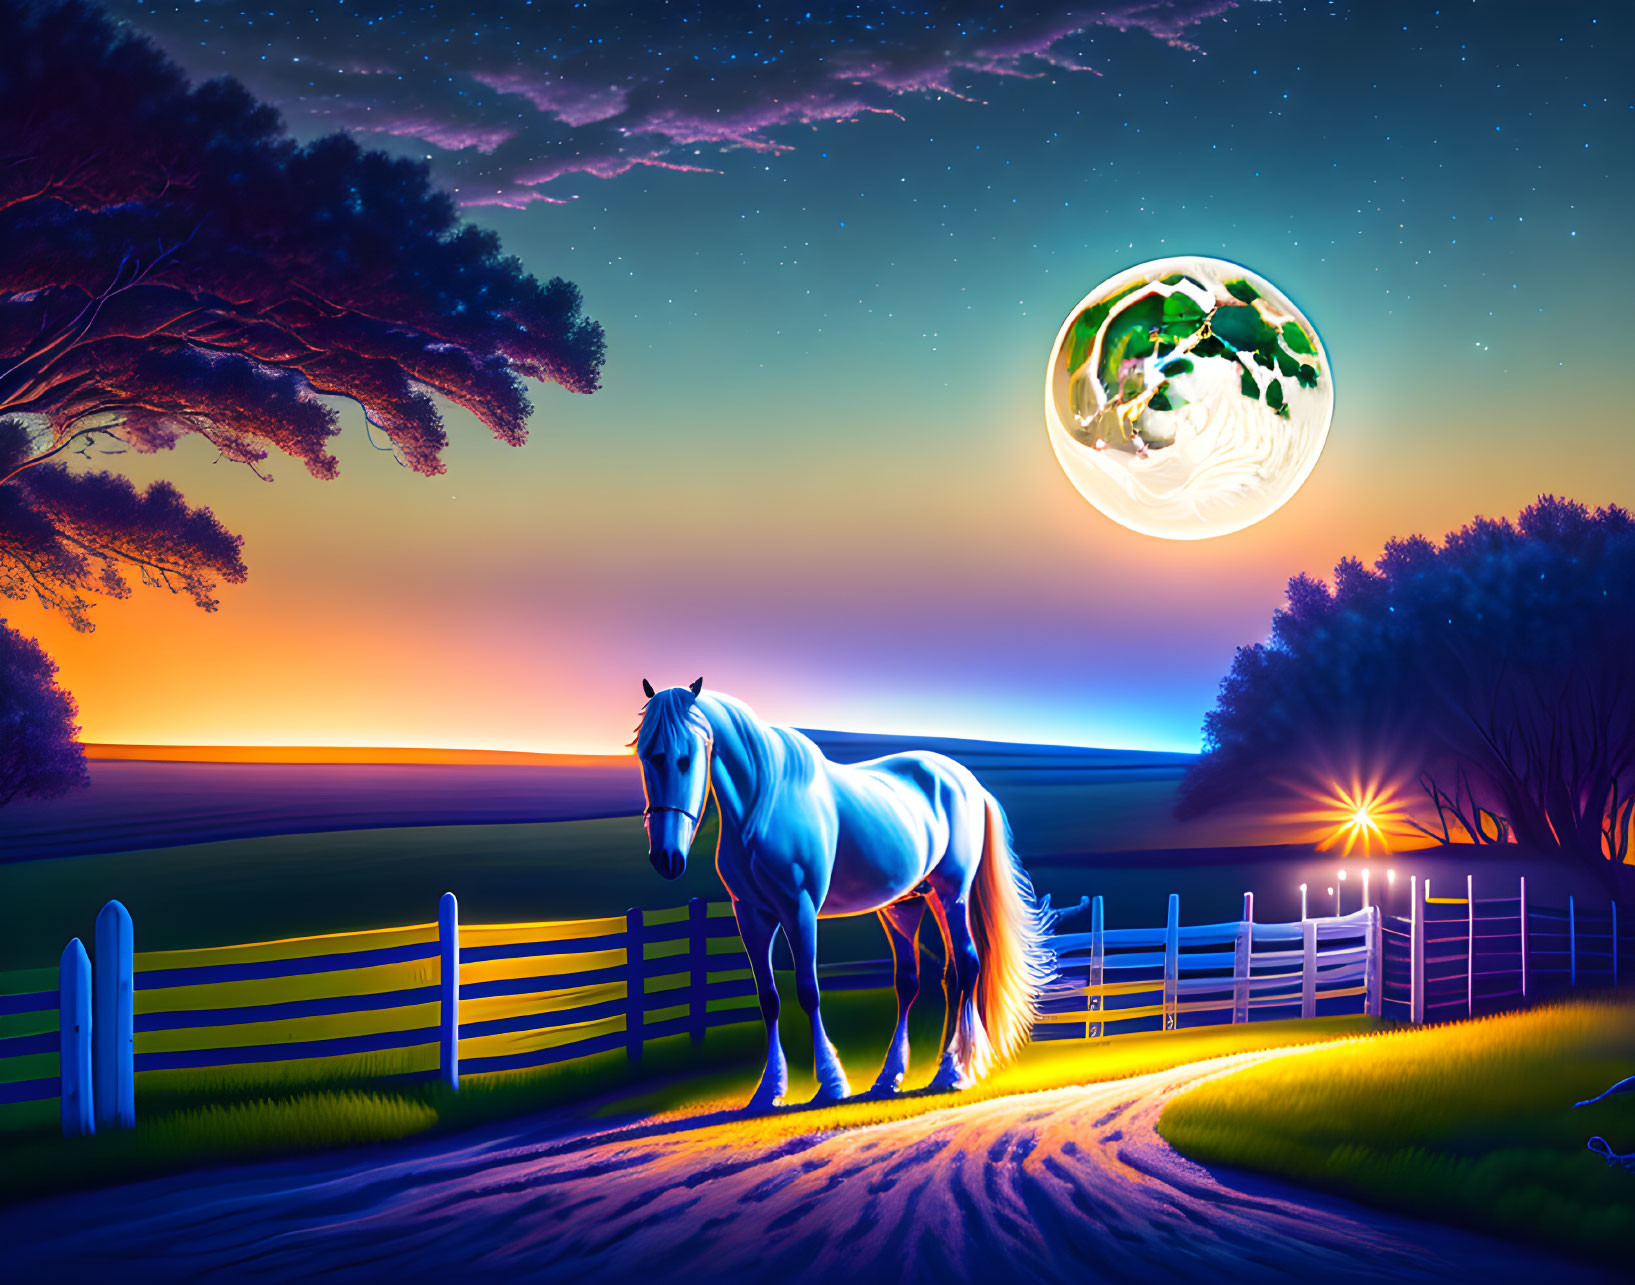 White horse by fence at twilight with vibrant sunset, oversized moon, and starry sky.